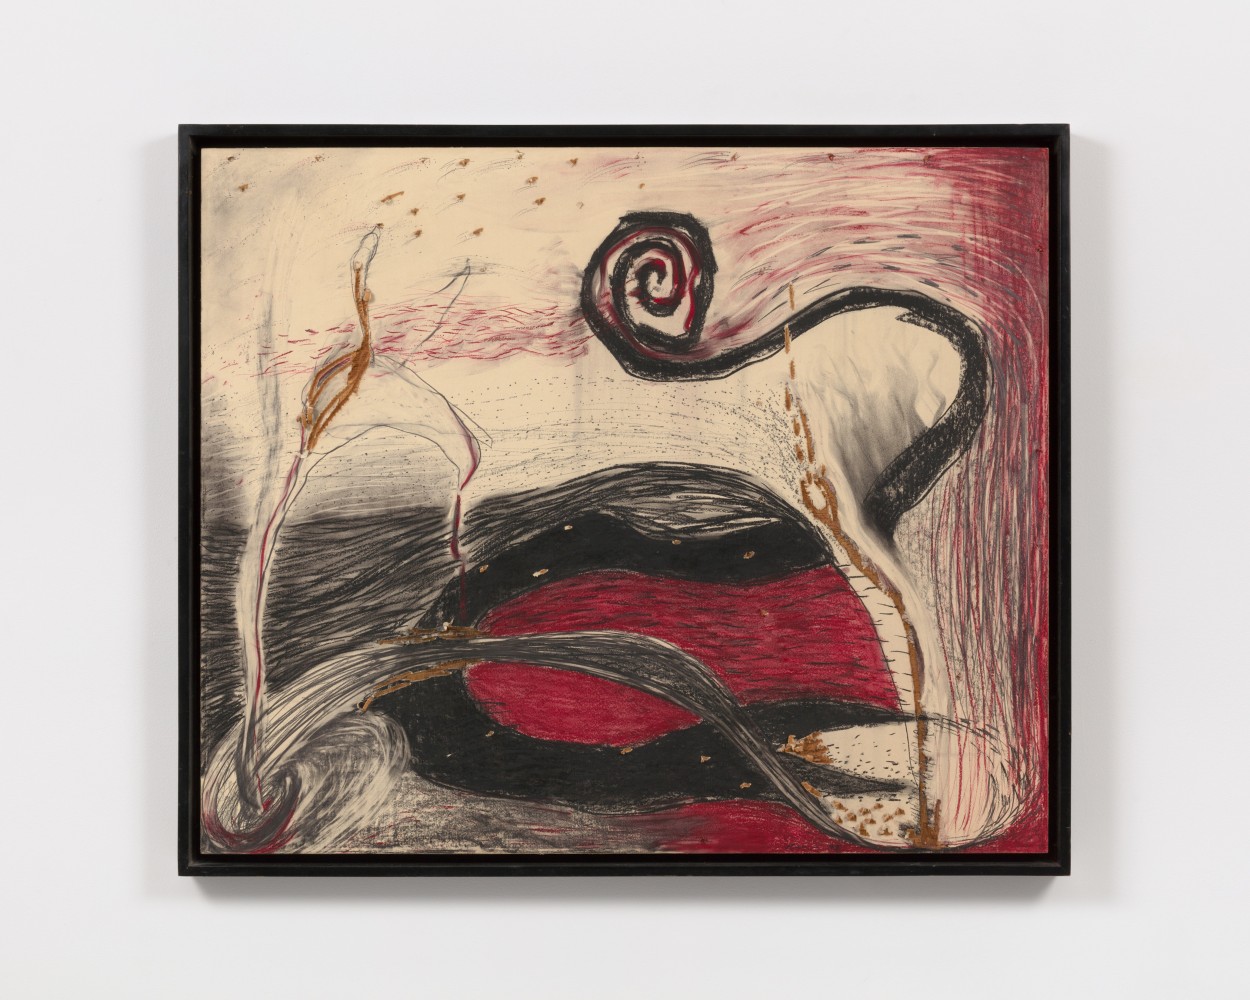 Laura Anderson Barbata
Sin t&amp;iacute;tulo/Untitled, 1992

charcoal, pastel, graphite and wood carving on paper

39 3/8 x 47 1/4 in. / 100 x 120 cm